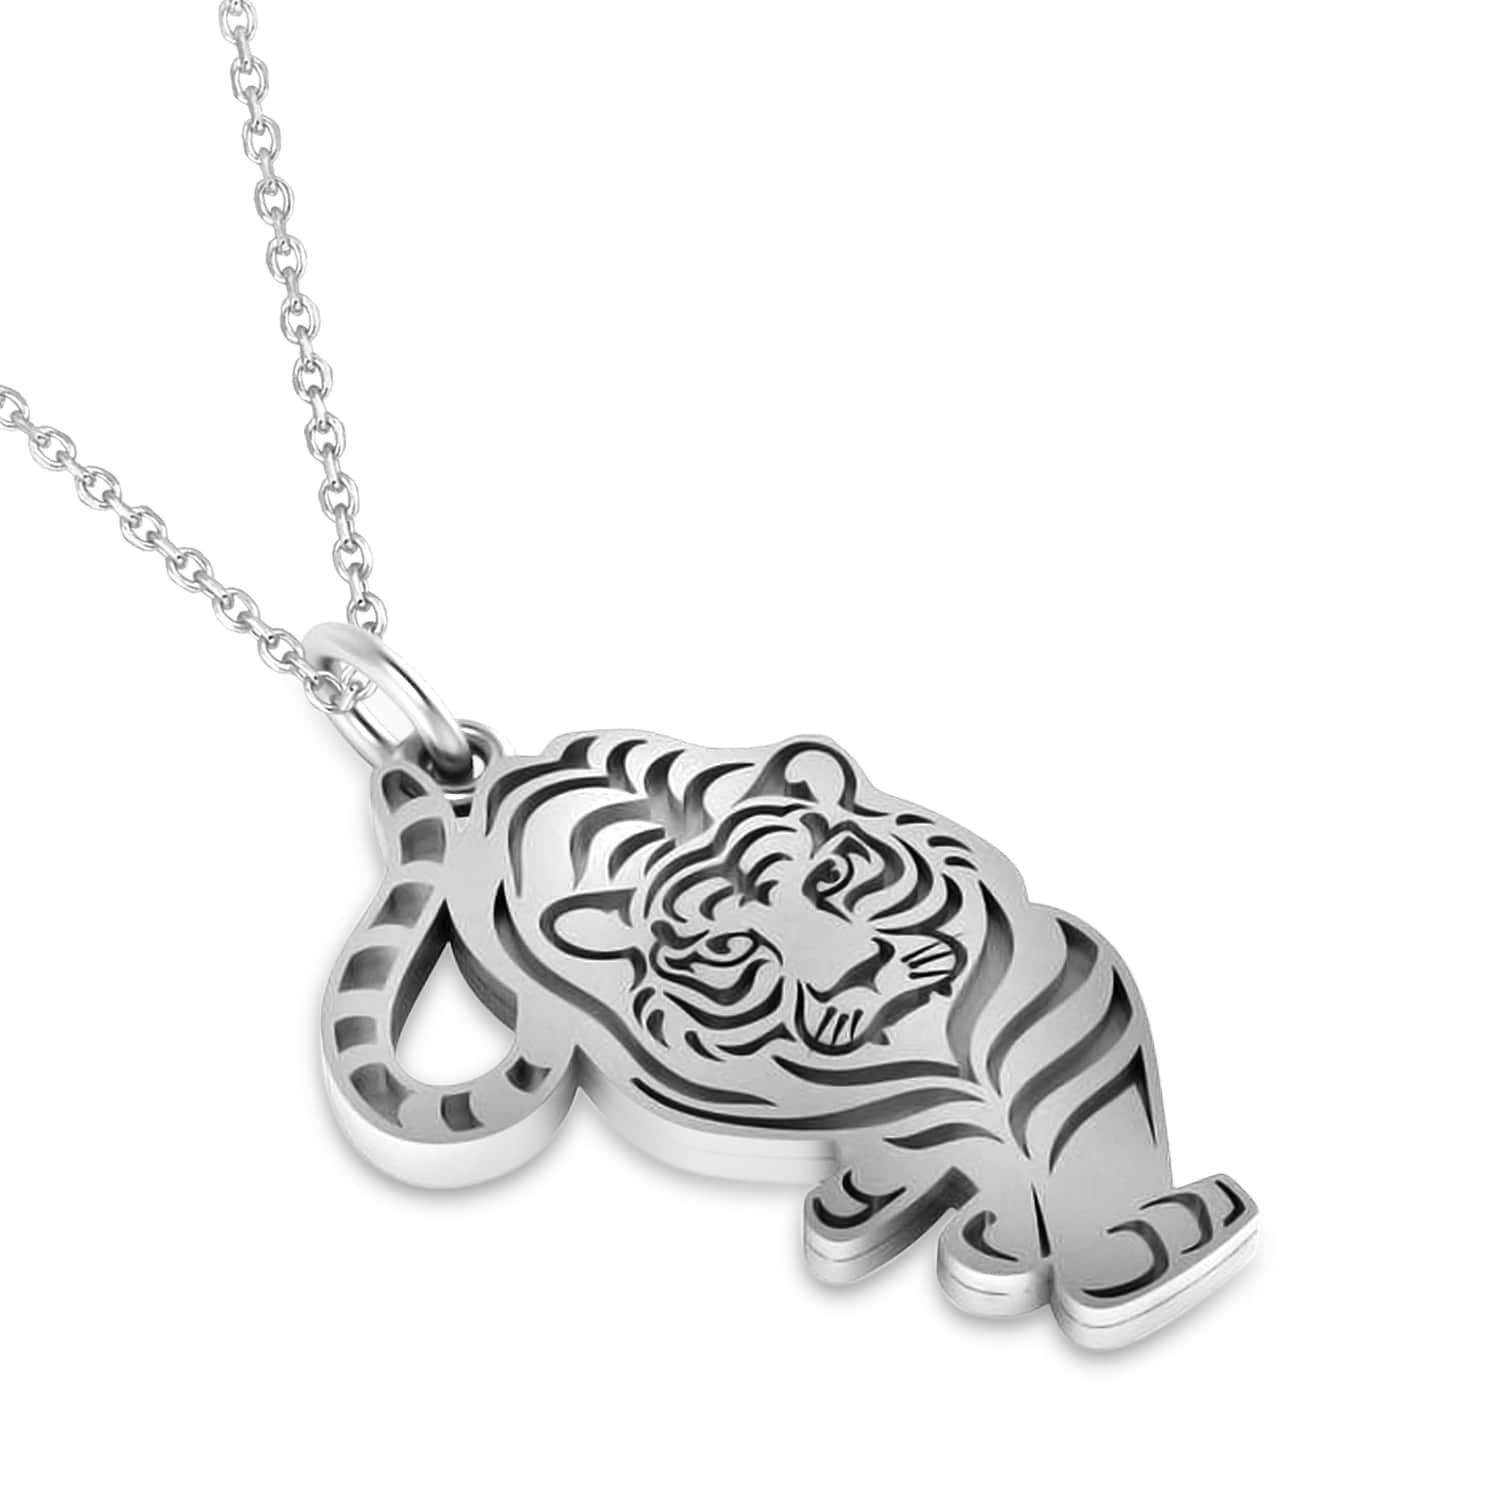 Tiger Shaped Charm Pendant Necklace 14k White Gold